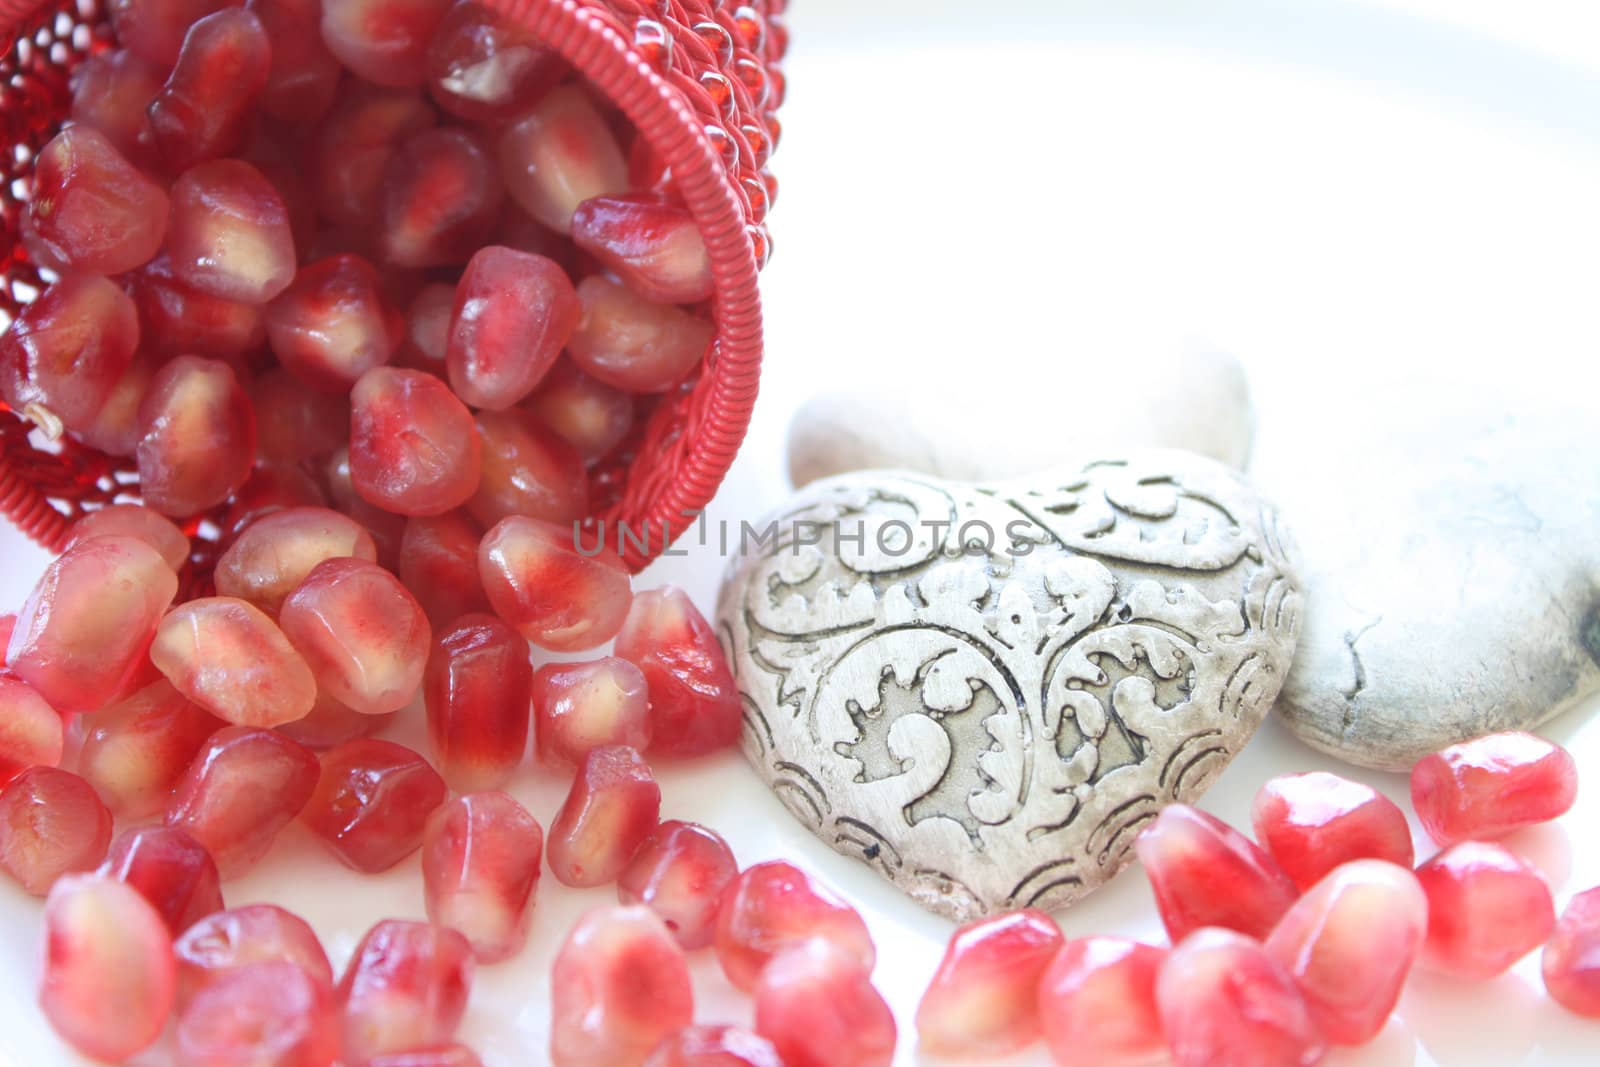 Pomegranite seeds spilling from a decorative container with ceramic hearts